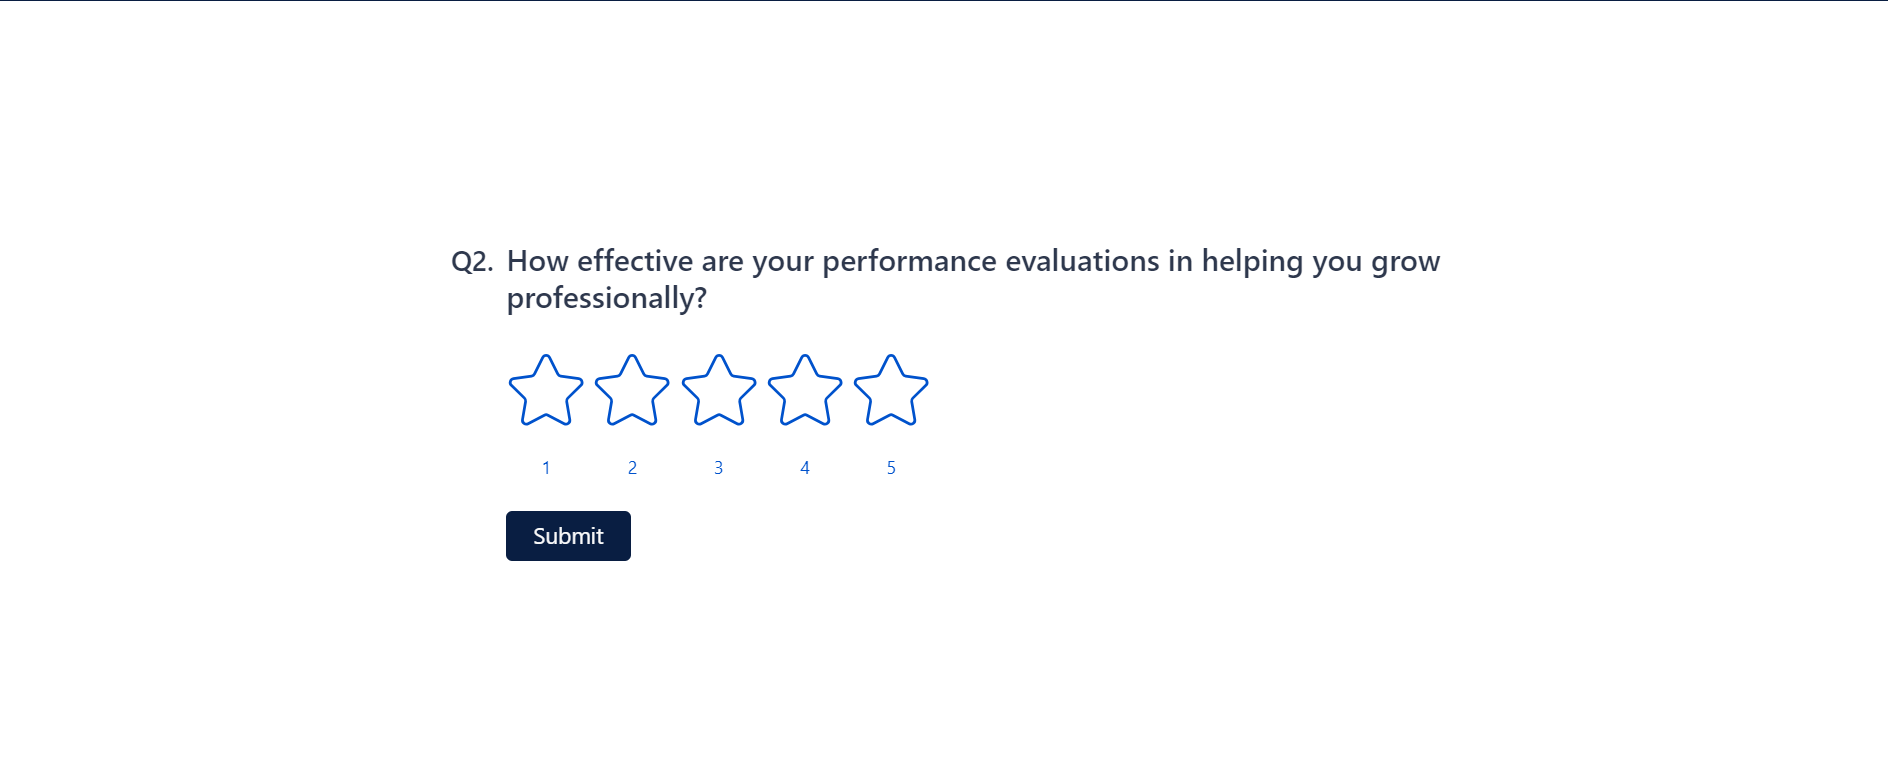 The image shows a question example for the performance feedback surveys offered by SurveySensum.